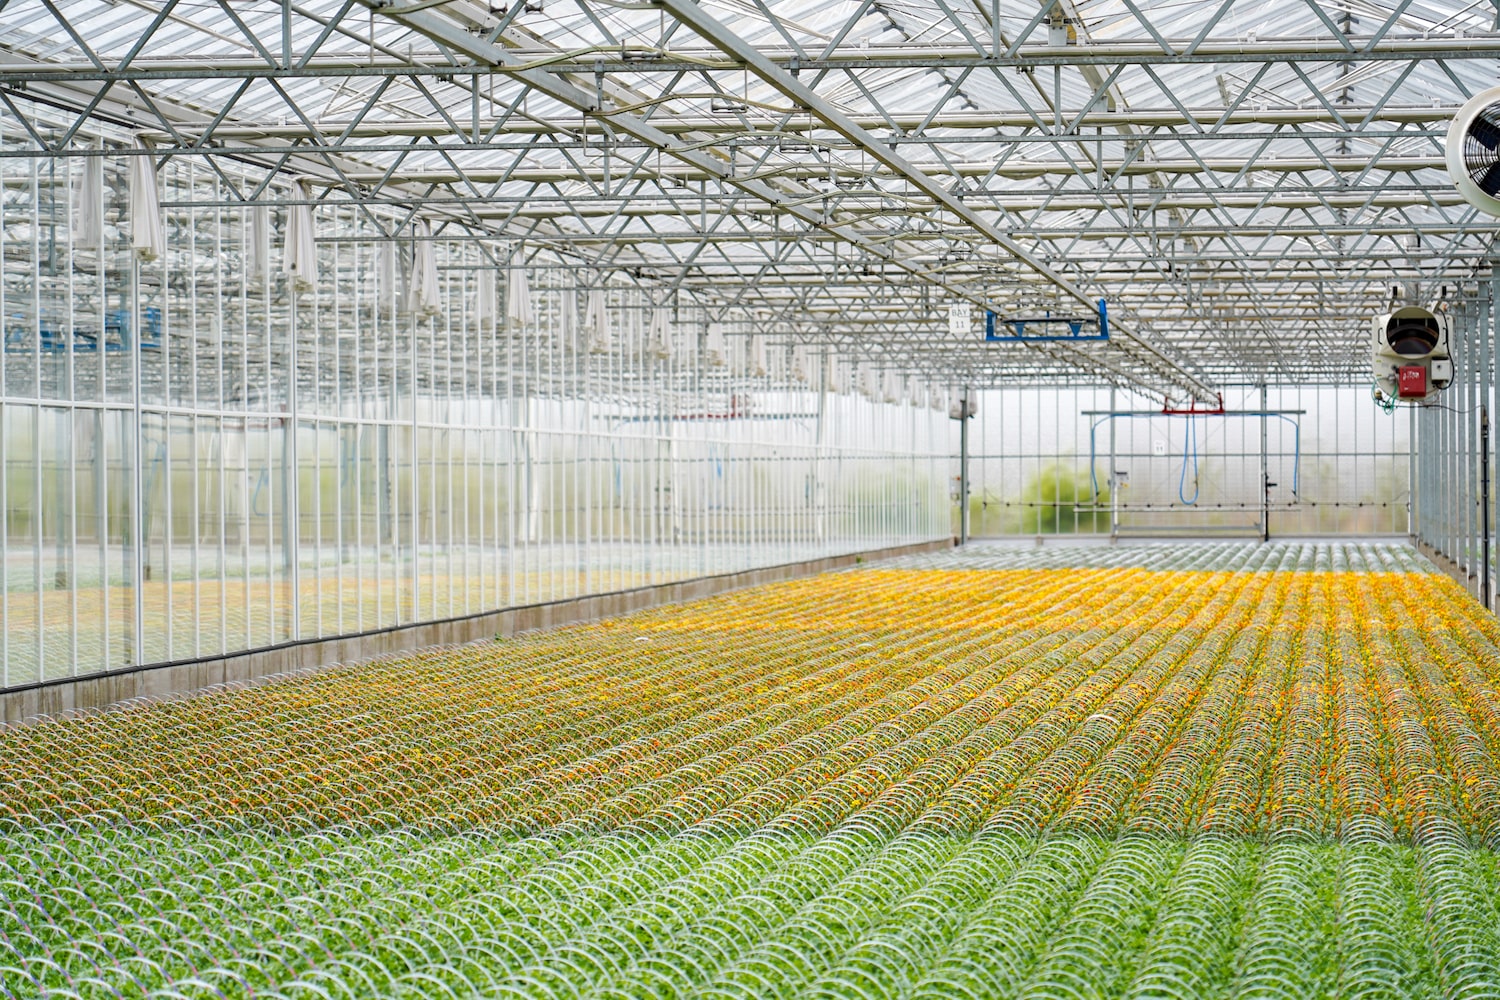 The Ambroses large greenhouse filled with pots of green plants and yellow flowers. They are being watered by a large irrigation system which hangs from the ceiling.